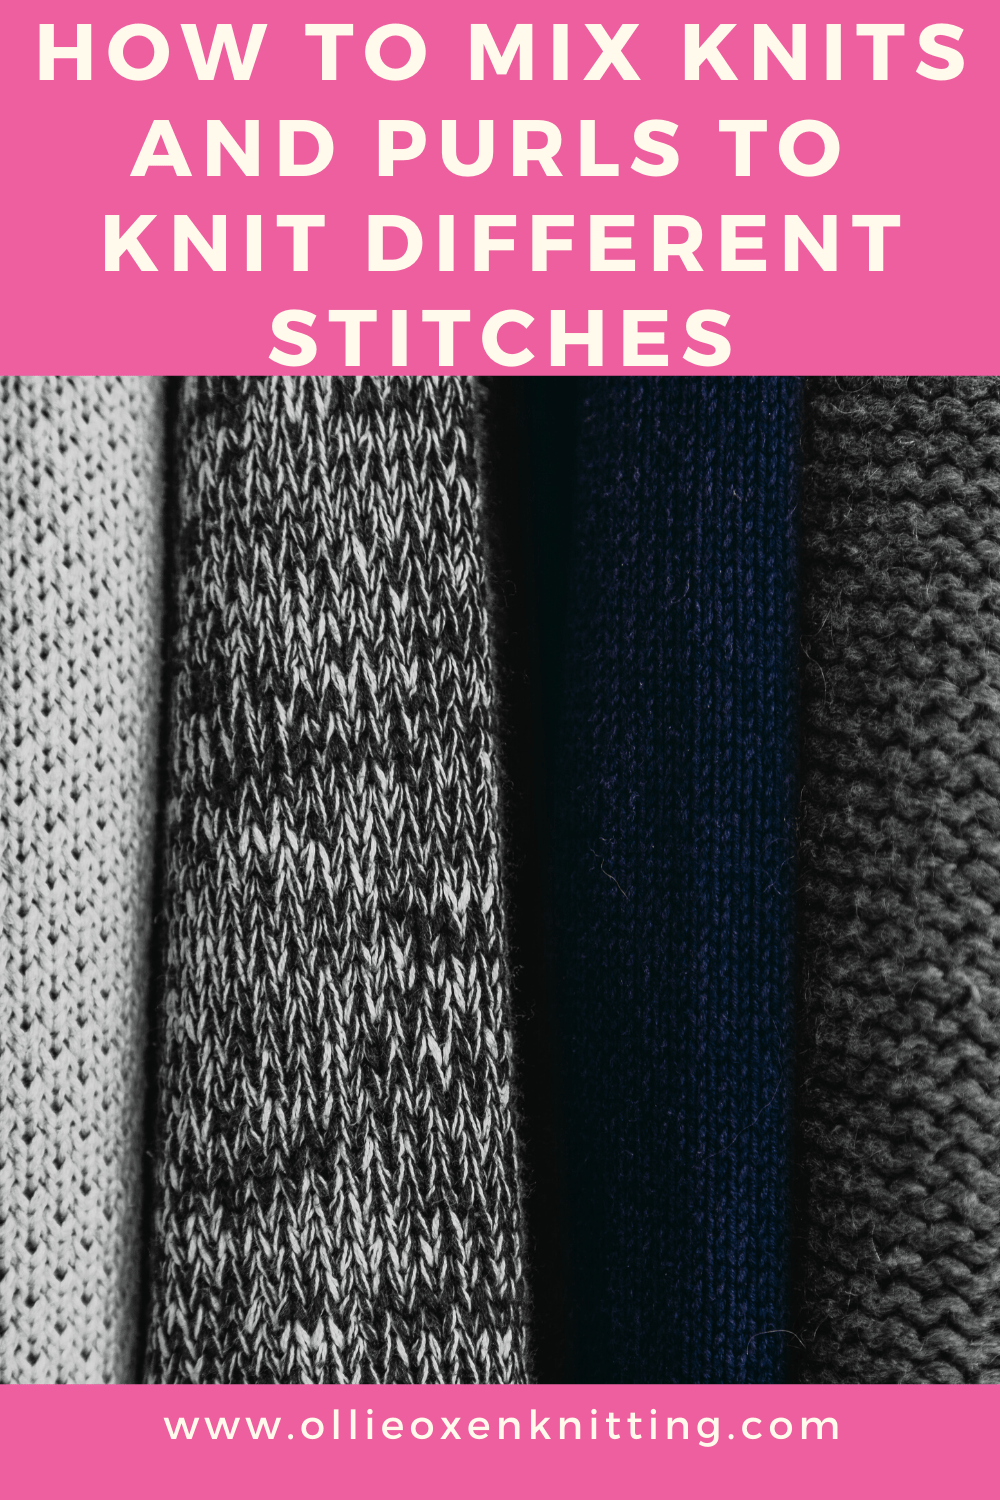 How To Mix Knits And Purls To Knit Different Stitches